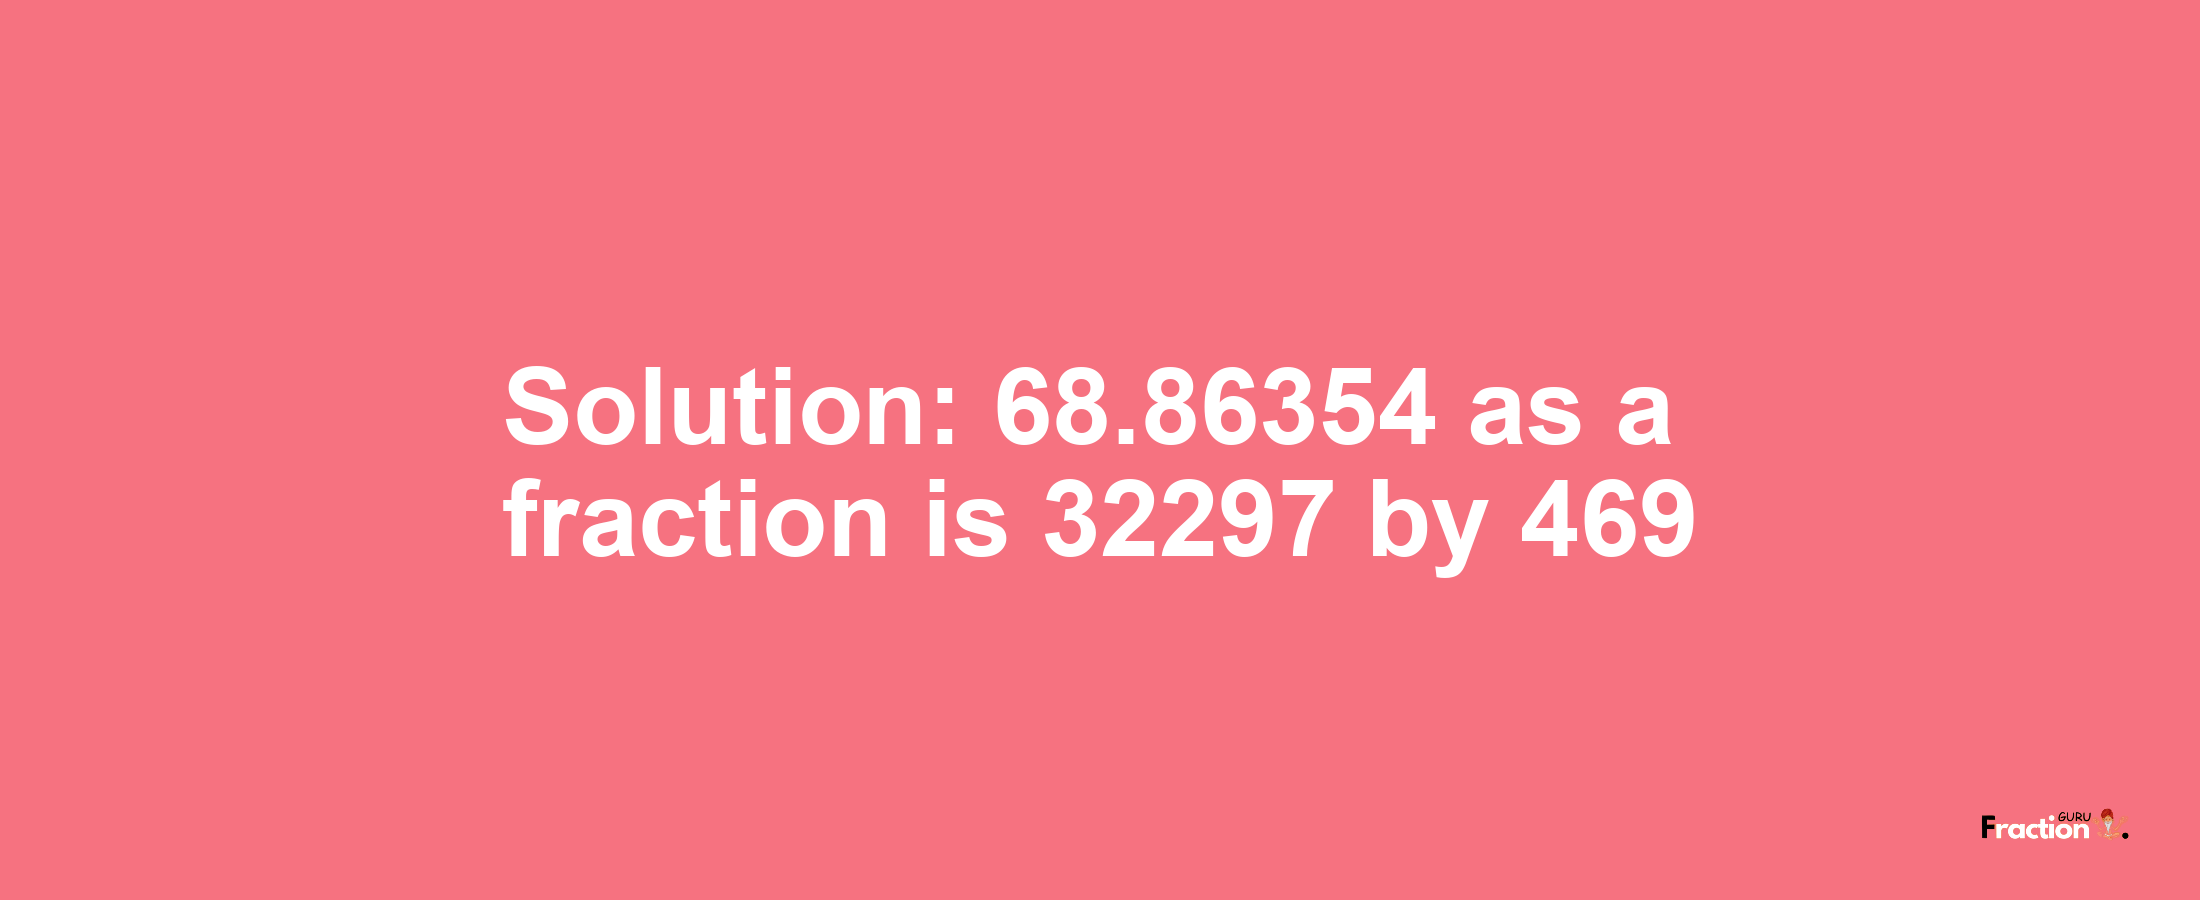 Solution:68.86354 as a fraction is 32297/469